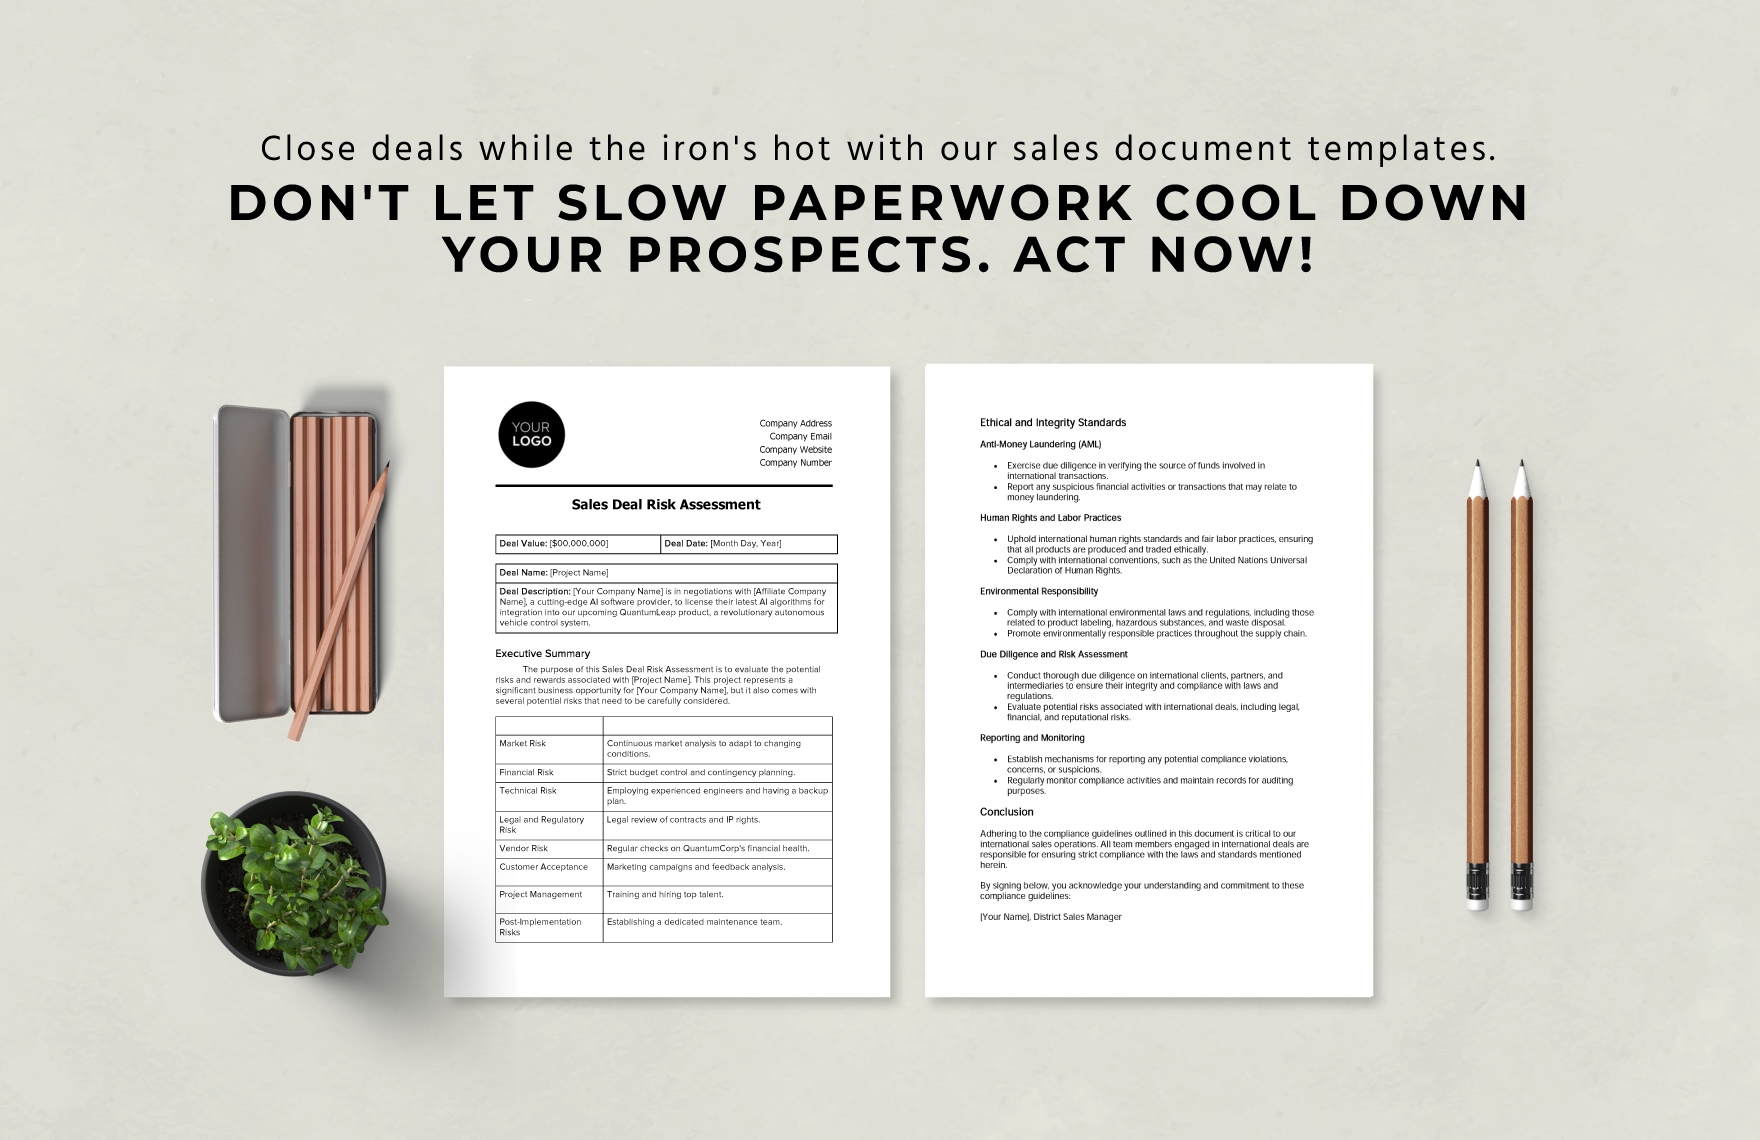 Sales Document for Compliance on International Deals Template